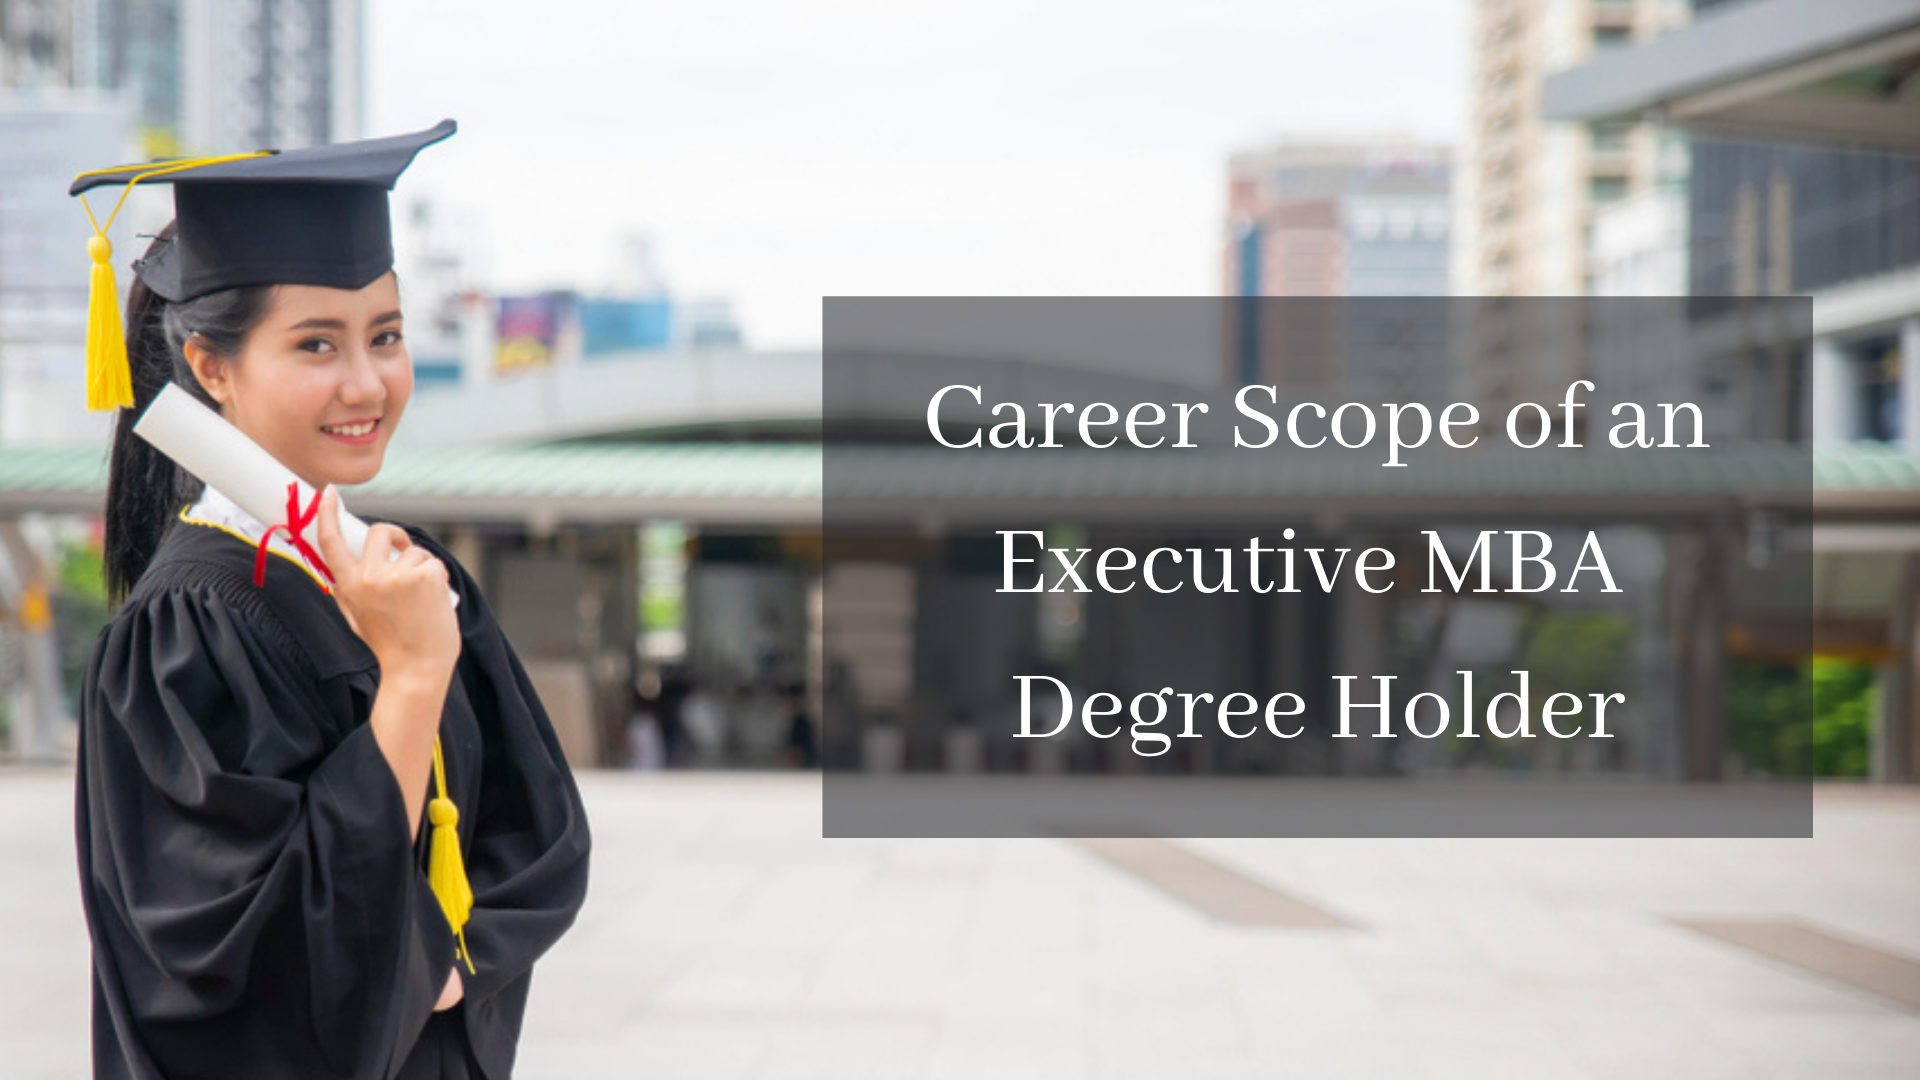 Career Scope for Executive MBA Holders?